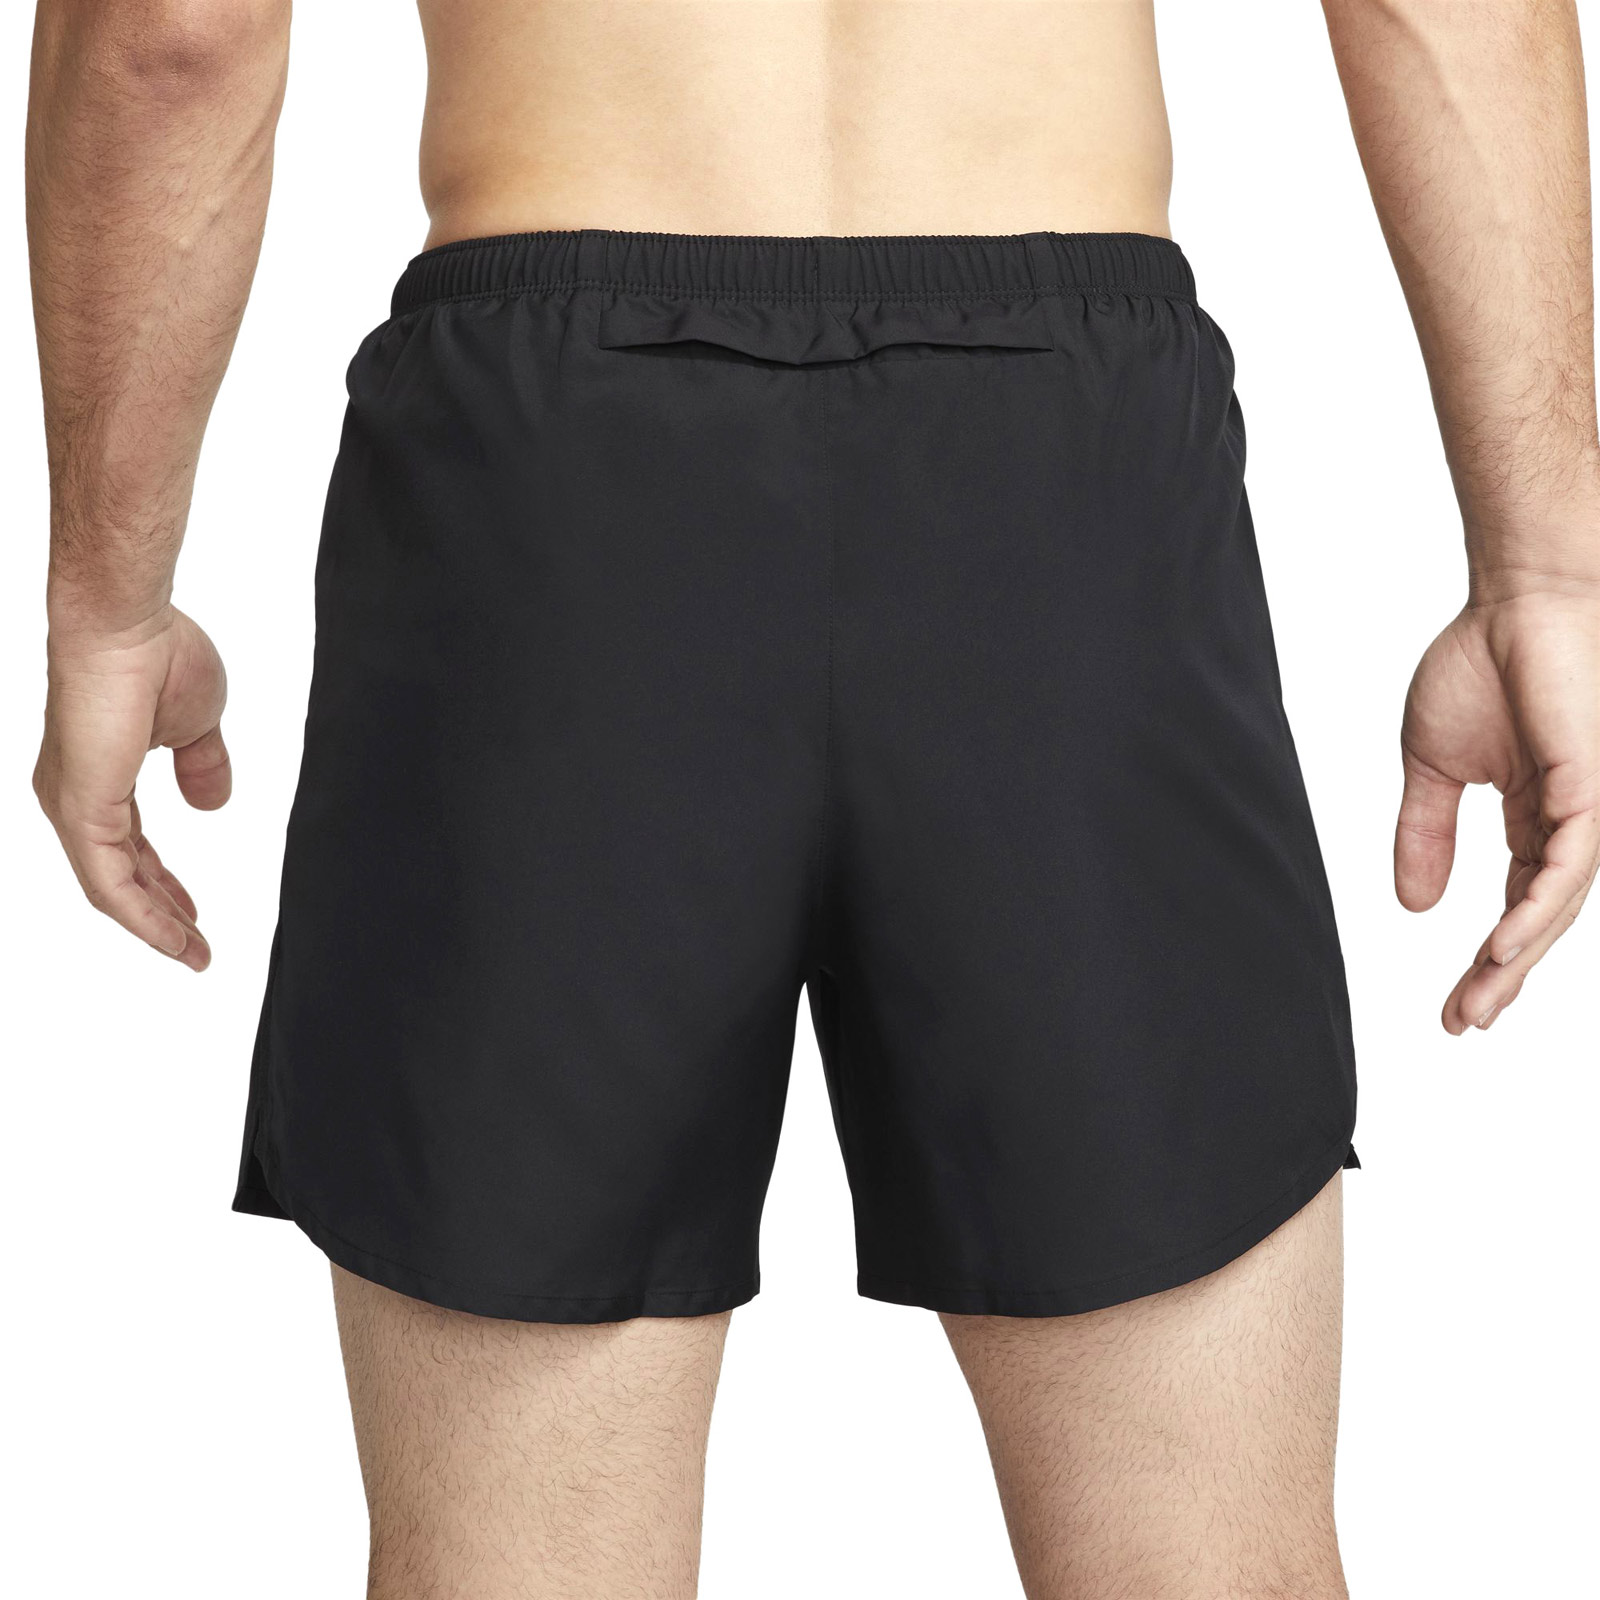 NIKE DRI-FIT RUN DIVISION CHALLENGER MENS 5" BRIEF-LINED SHORTS